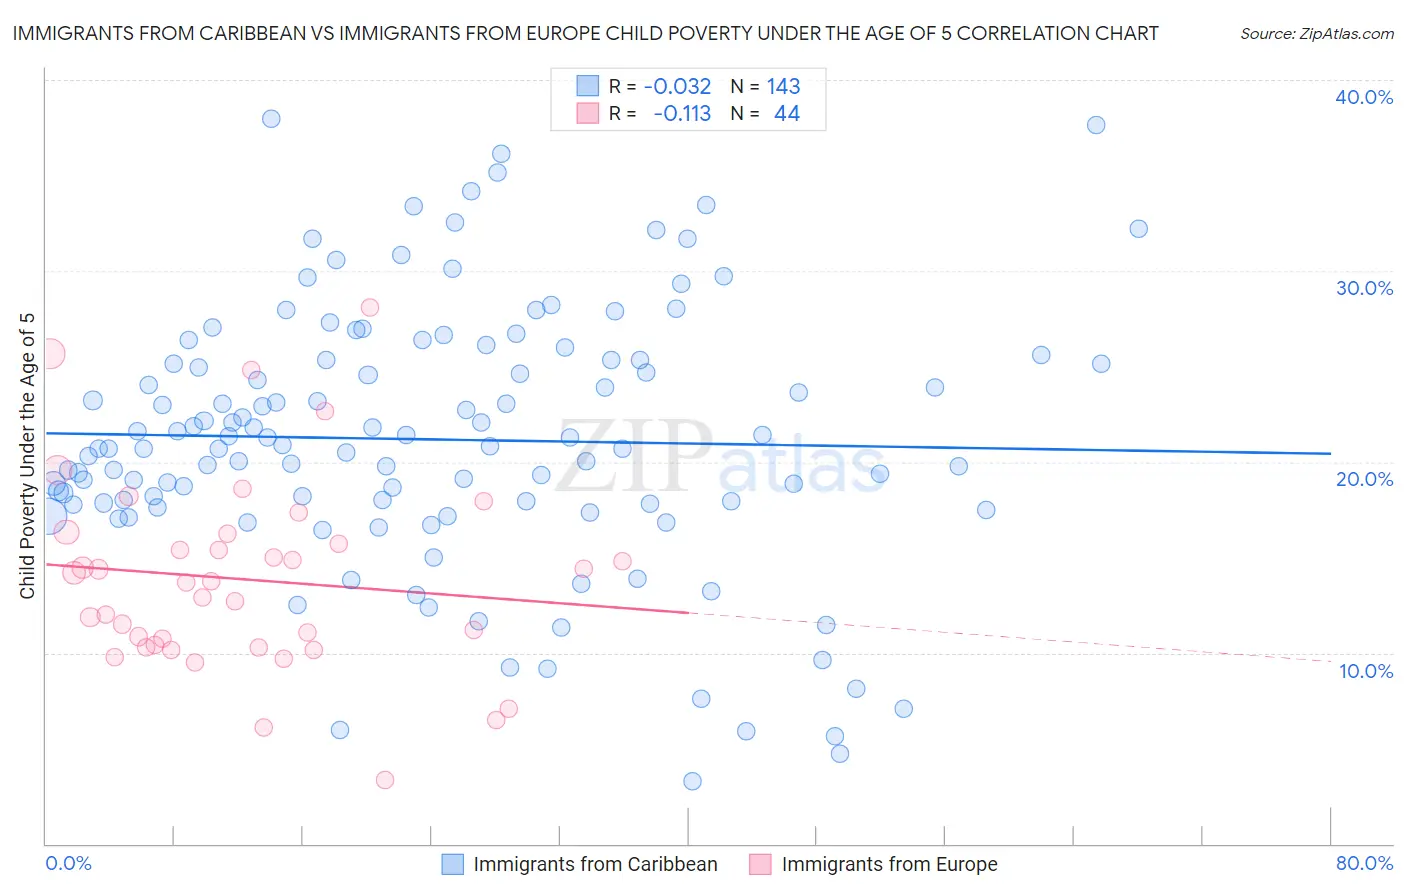 Immigrants from Caribbean vs Immigrants from Europe Child Poverty Under the Age of 5